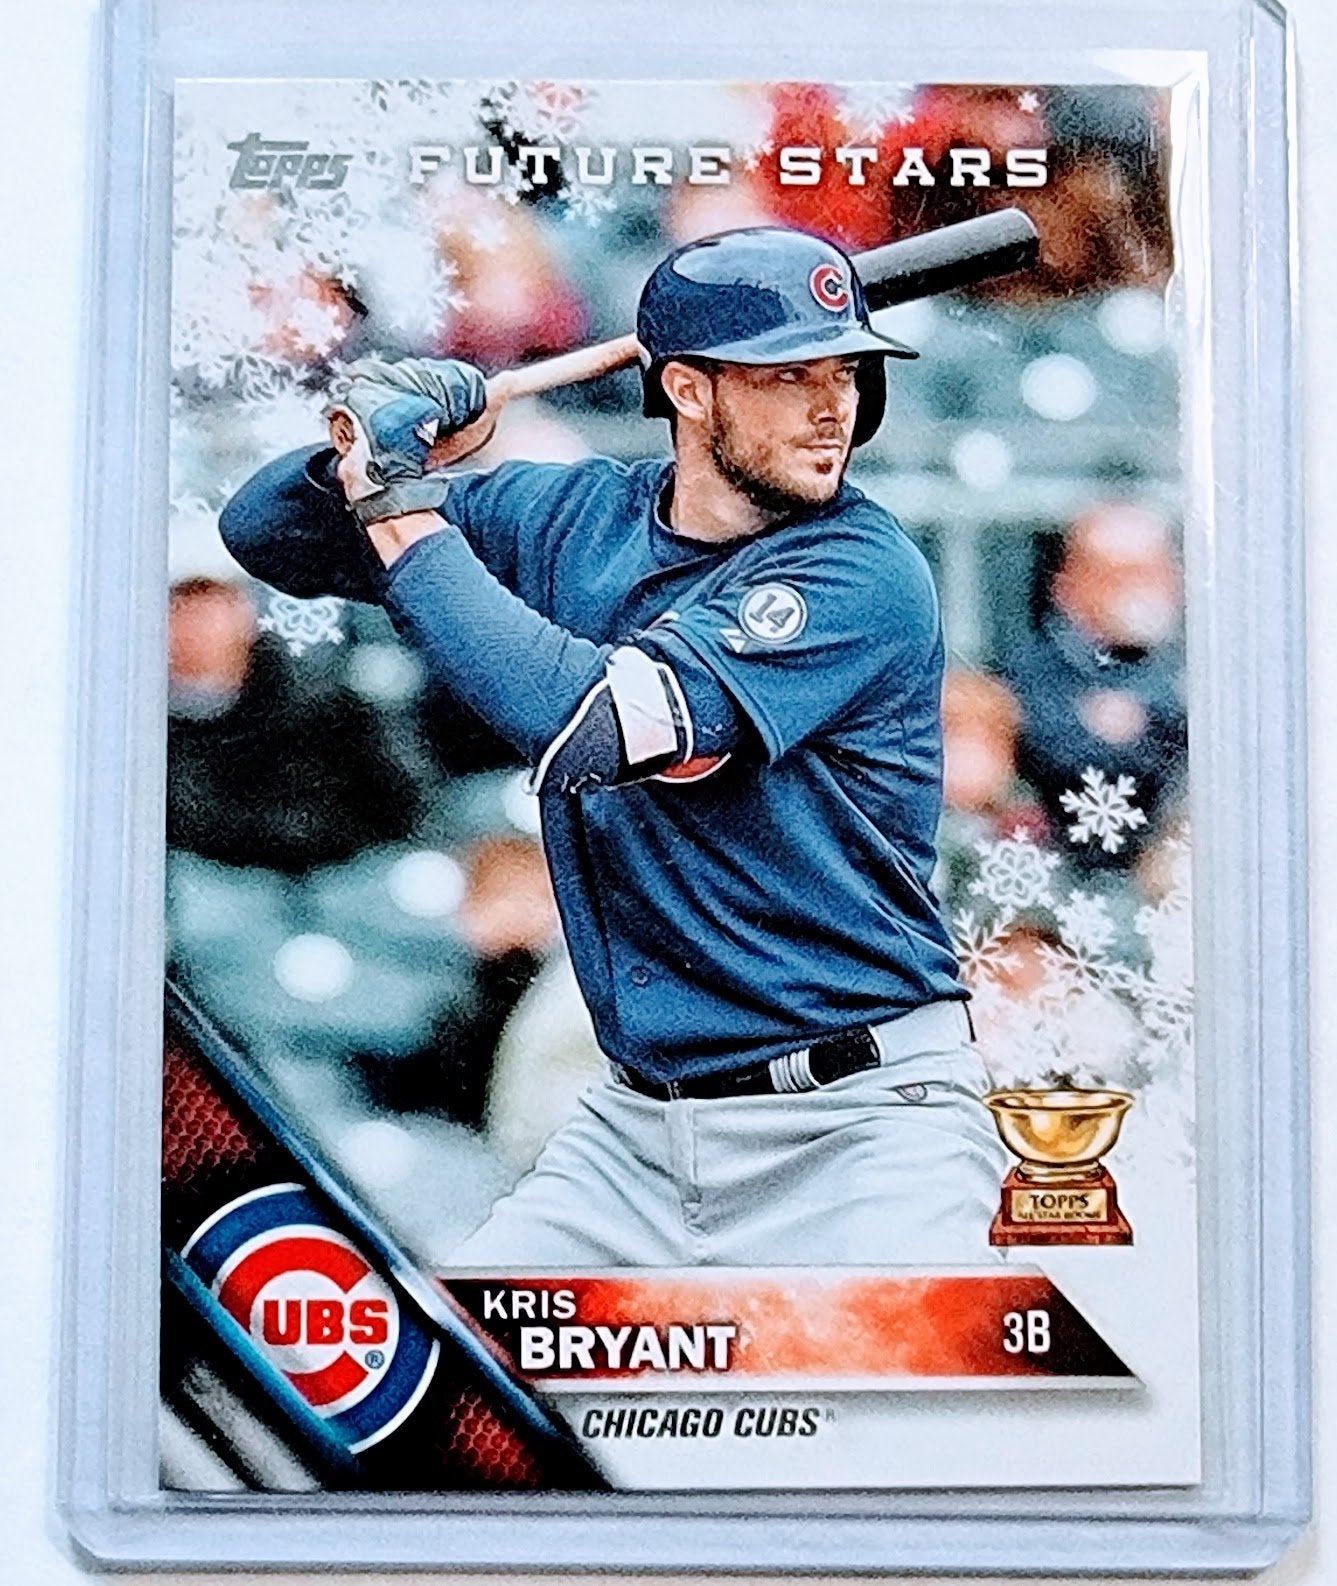 2016 Topps Holiday Kris Bryant Future Stars All Star Rookie Baseball Card TPTV simple Xclusive Collectibles   